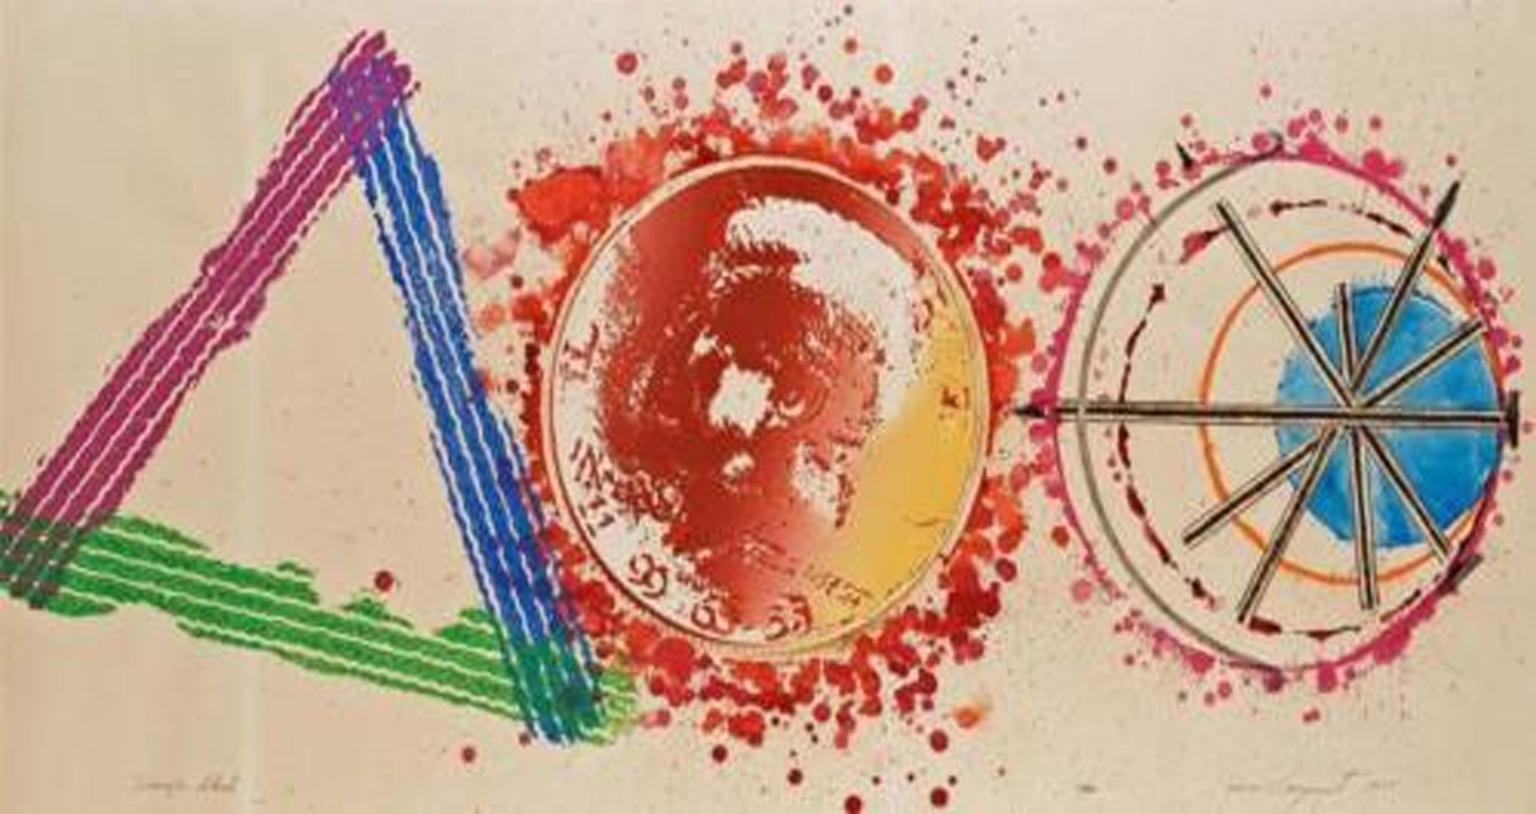 James Rosenquist (American, 1933–2017) Title: Triangle Skid (the Assassination of President Kennedy) 1975, Medium: Original one of a kind mixed media Drawing, Watercolor and collage on paper Size: 92 x 190 cm. (36.2 x 74.8 in.) Hand Signed and